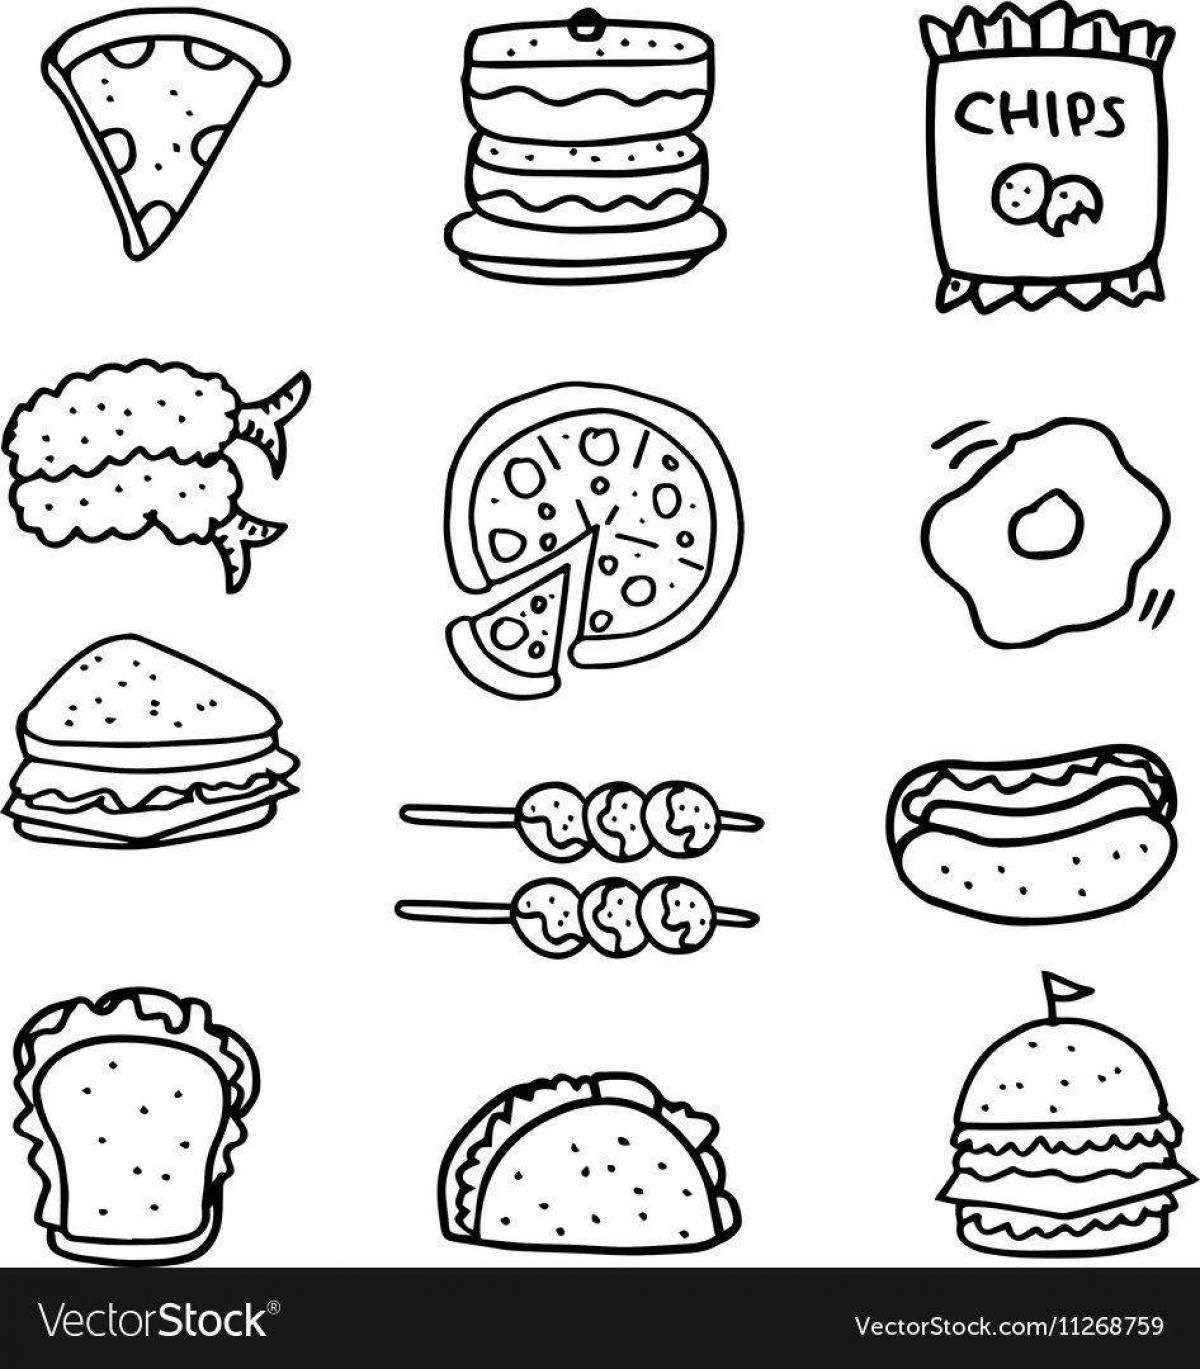 Bad food coloring page